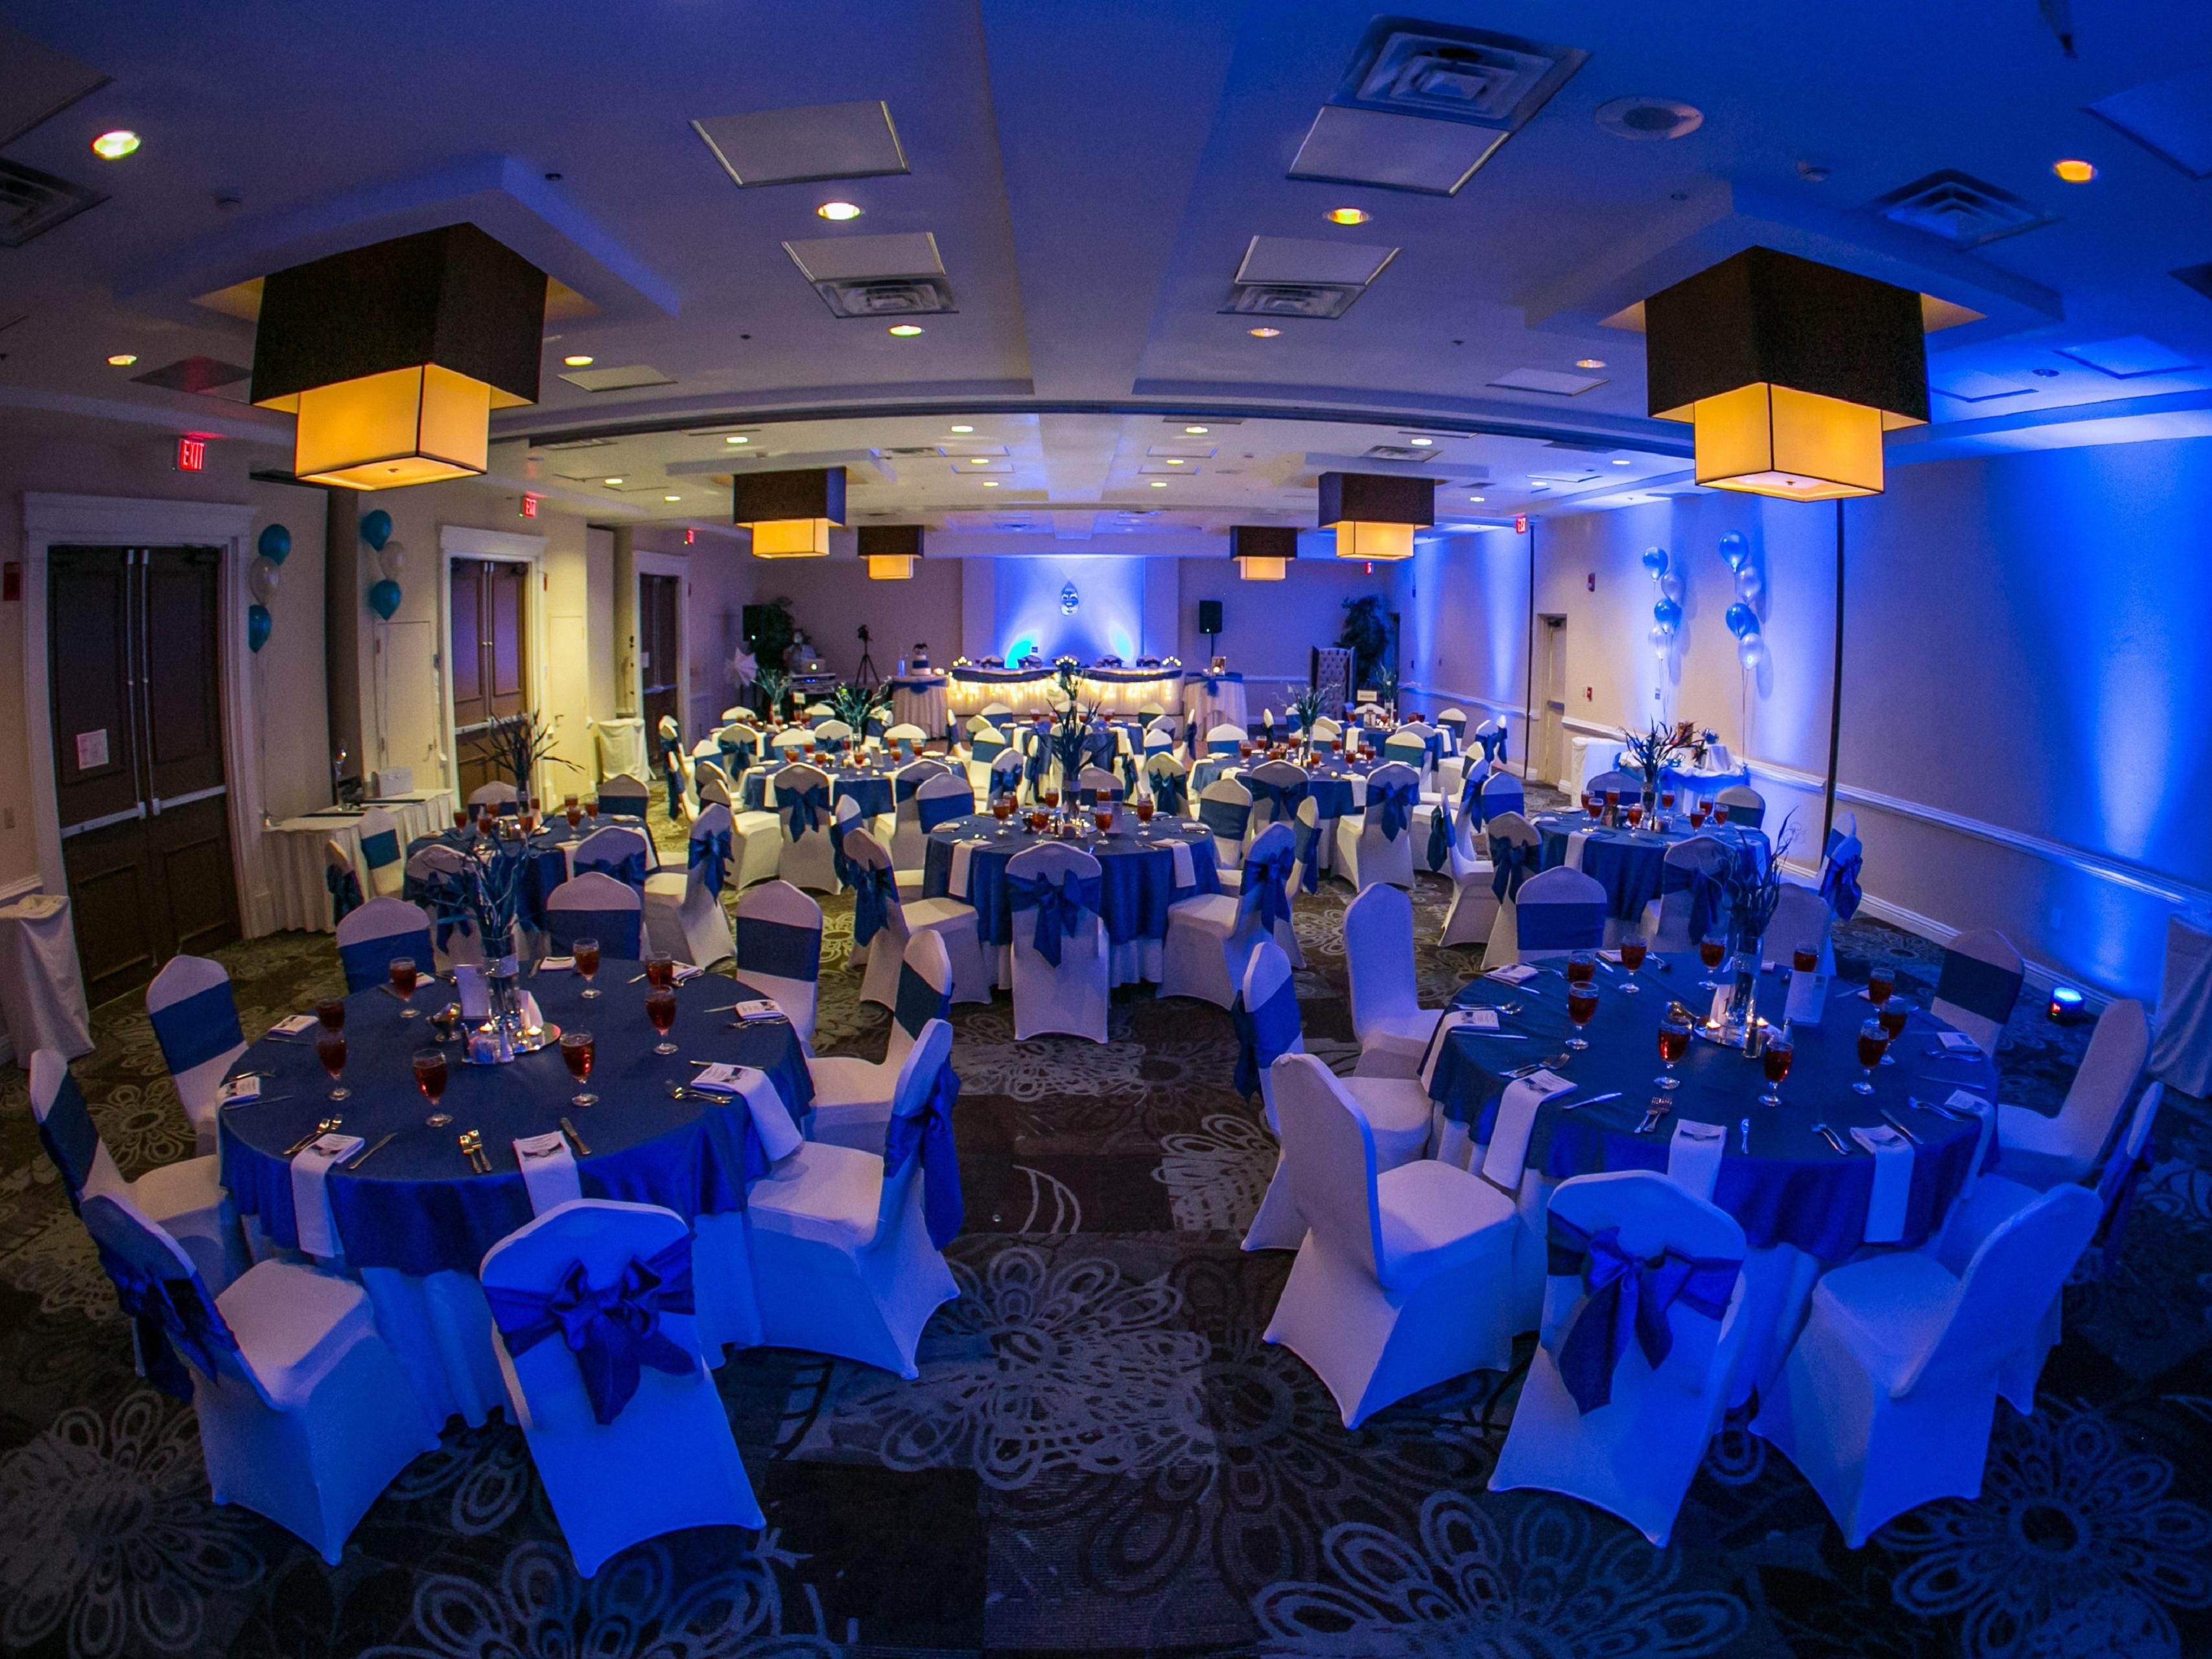 We have over 5000 sq ft of meeting space and 149 guest rooms available for your function needs. Wi-Fi is complimentary to all guests and parking is free. Our sales department is willing to work within your budget to bring your event ideas to fruition.